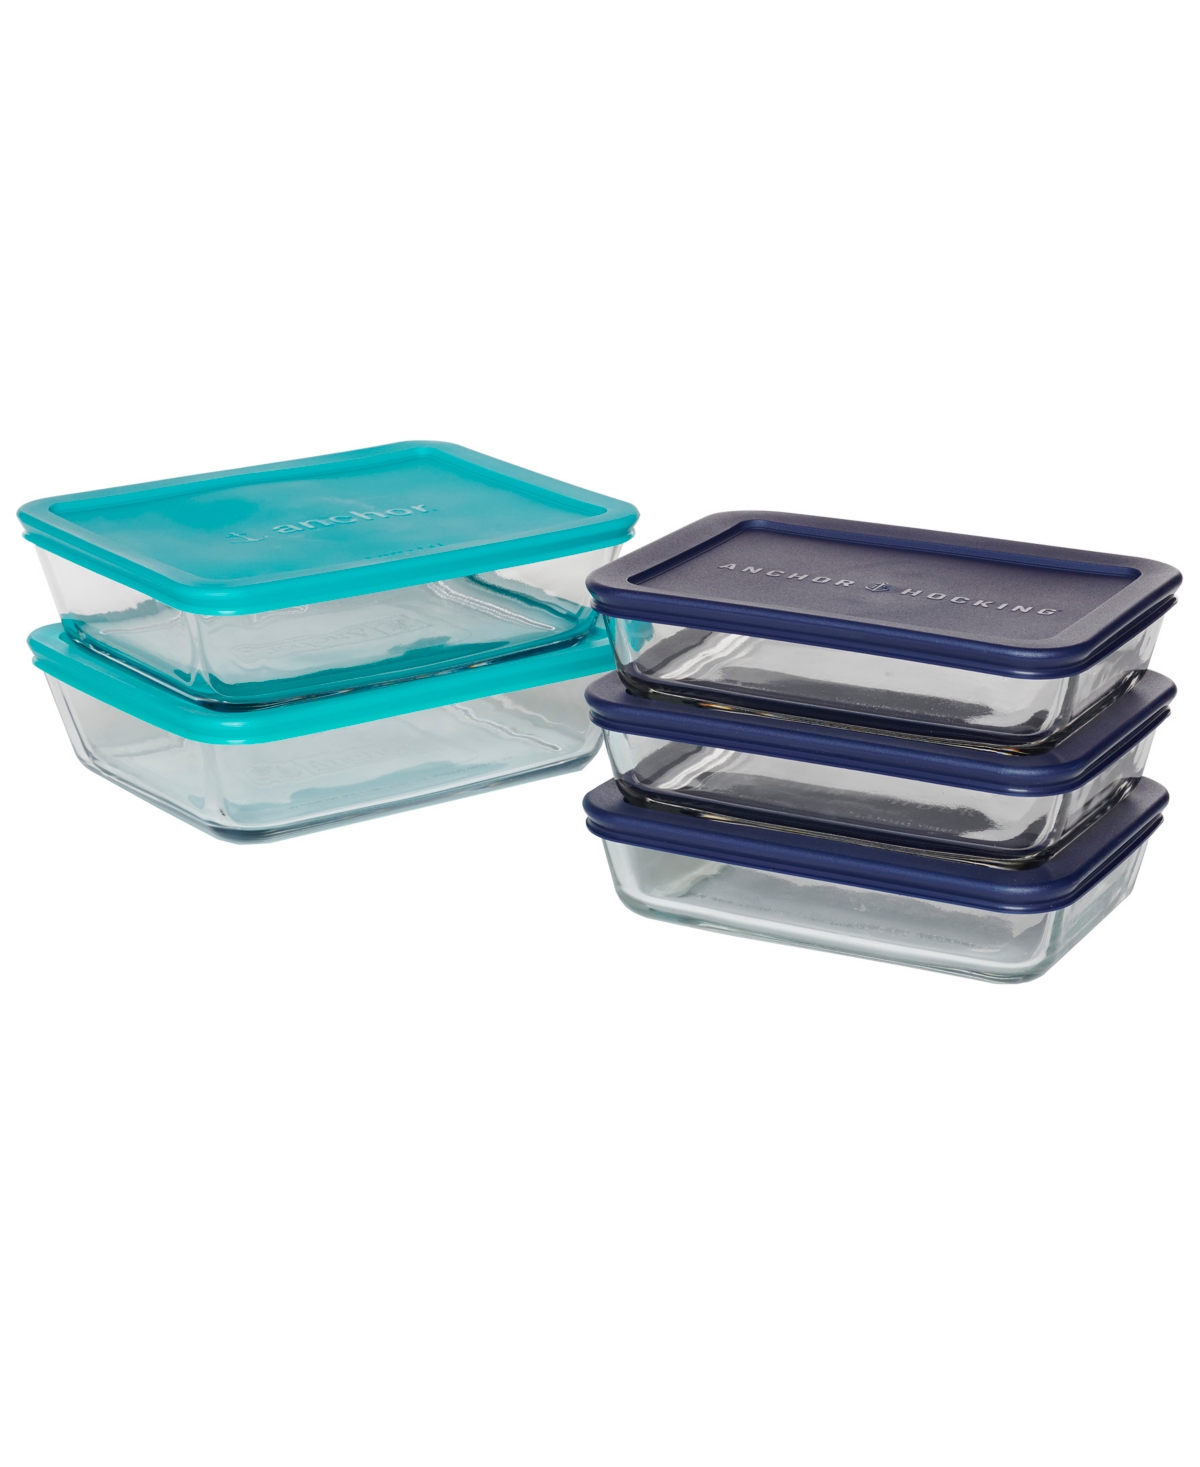 Anchor Hocking 10 Pc Rectangular Meal Prep Food Storage Set In Clear Glass,mixed Blue Lids